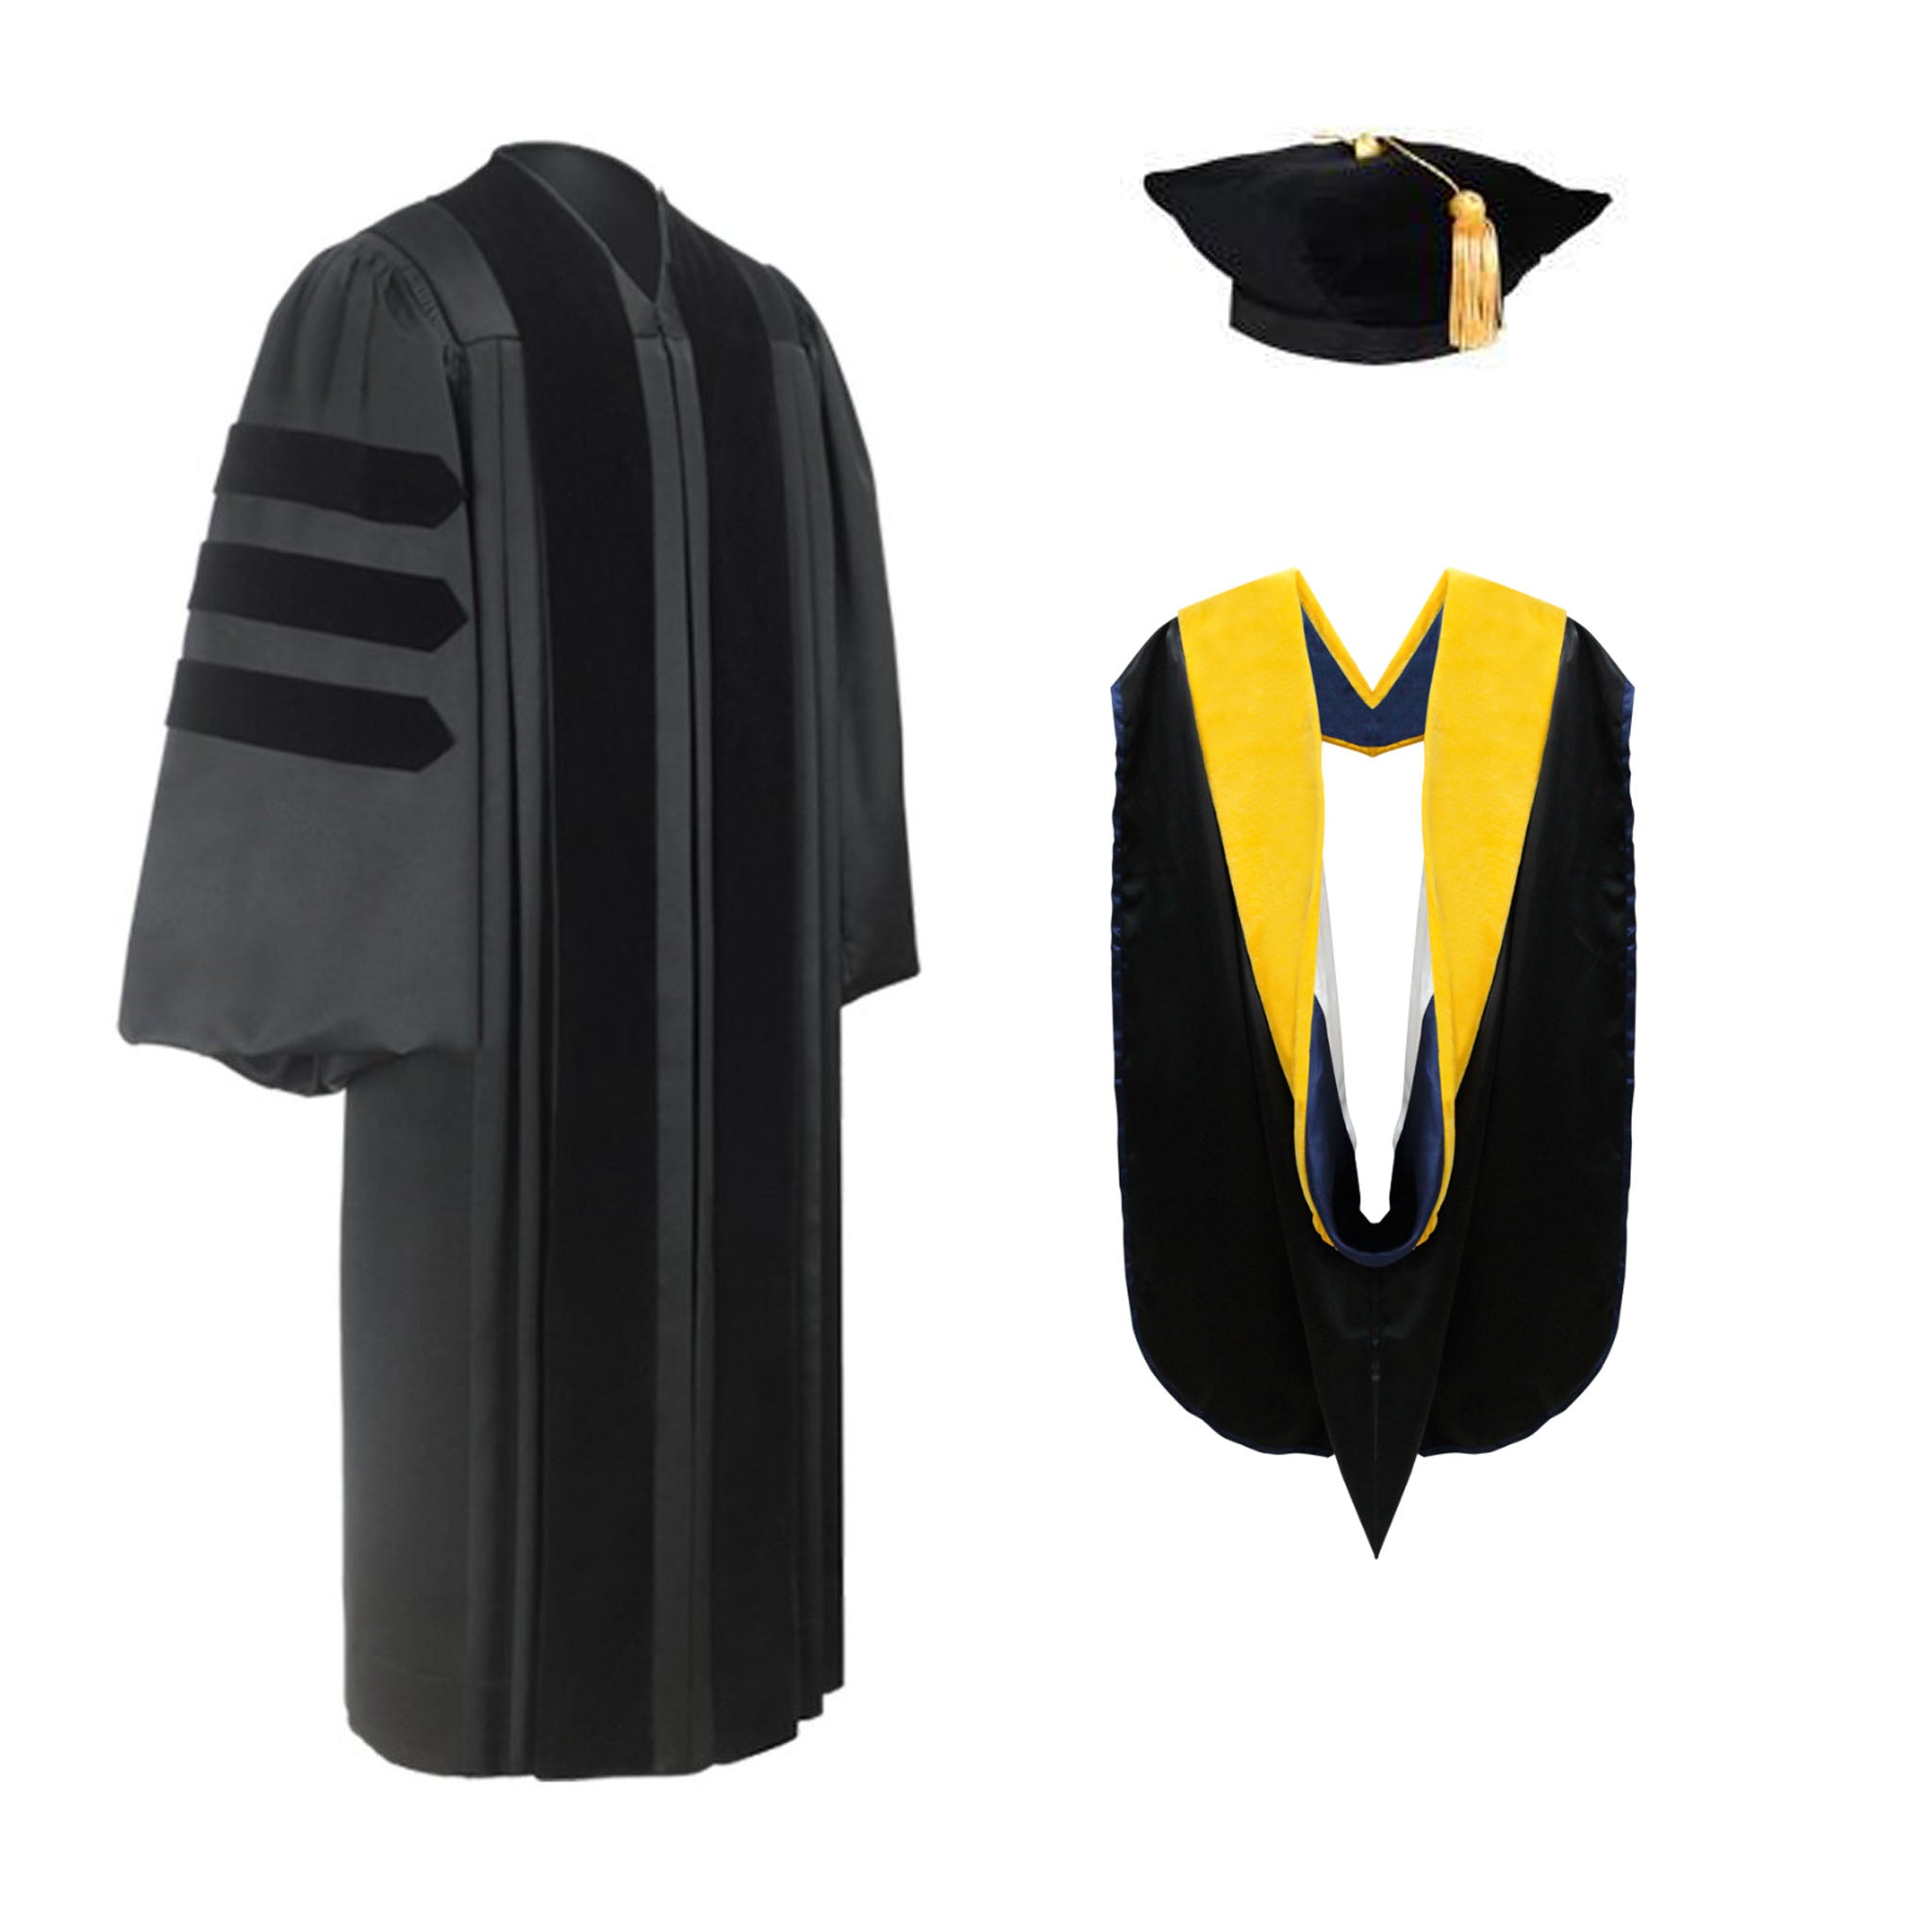 Regalia 101 for doctoral degree candidates. - YouTube